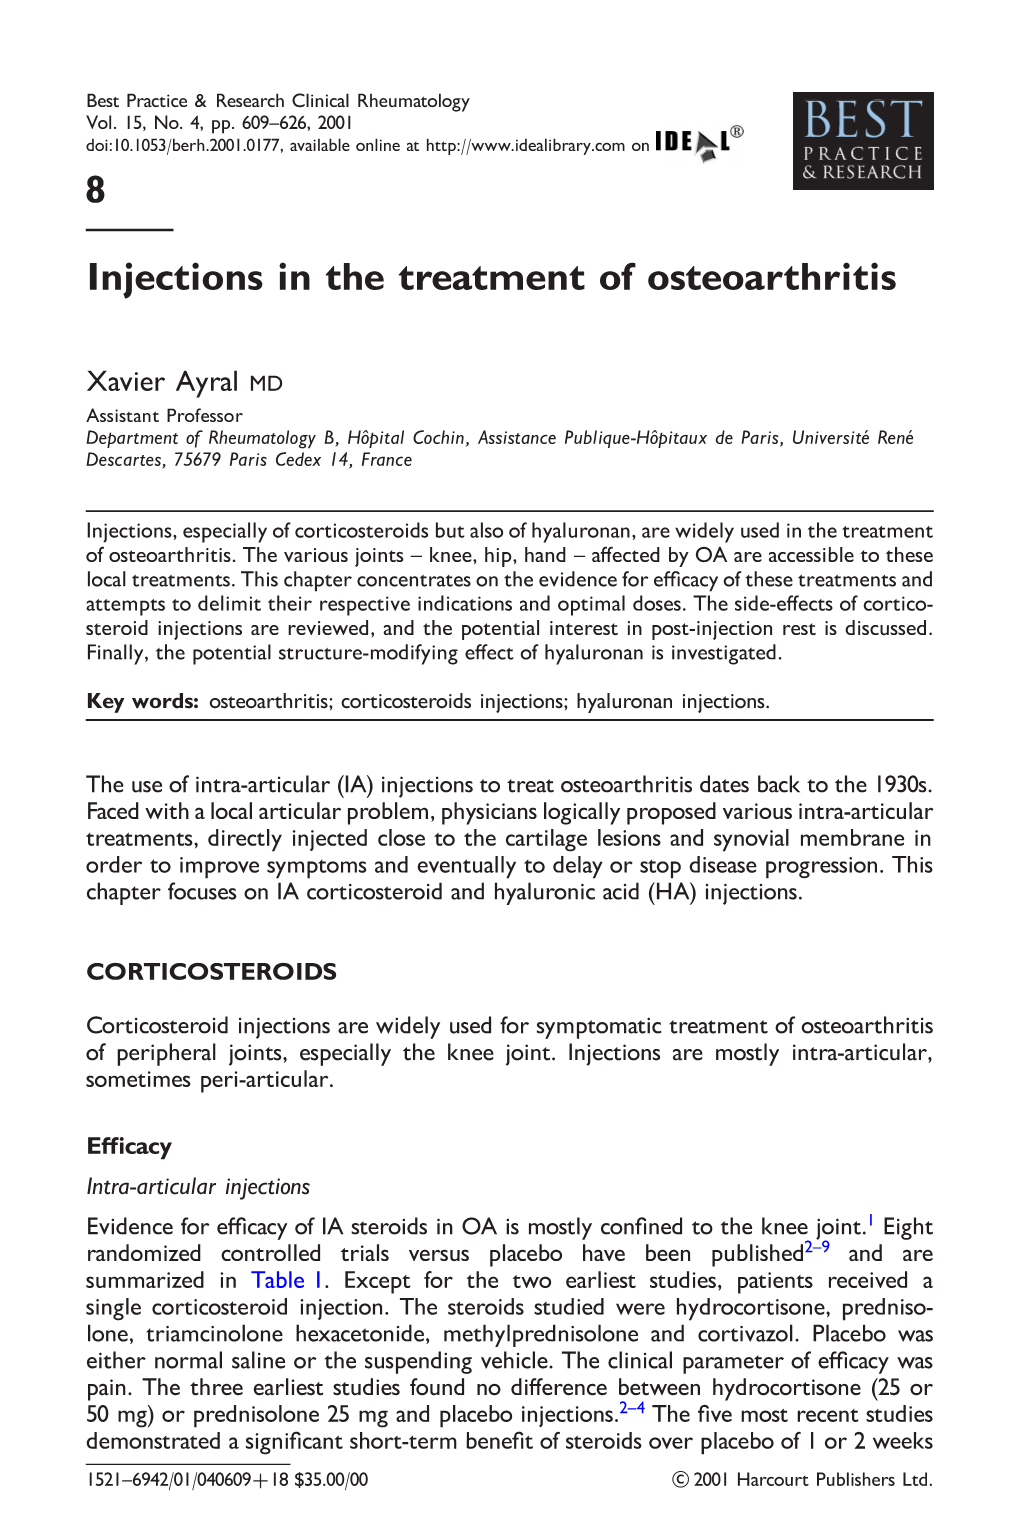 Injections in the Treatment of Osteoarthritis